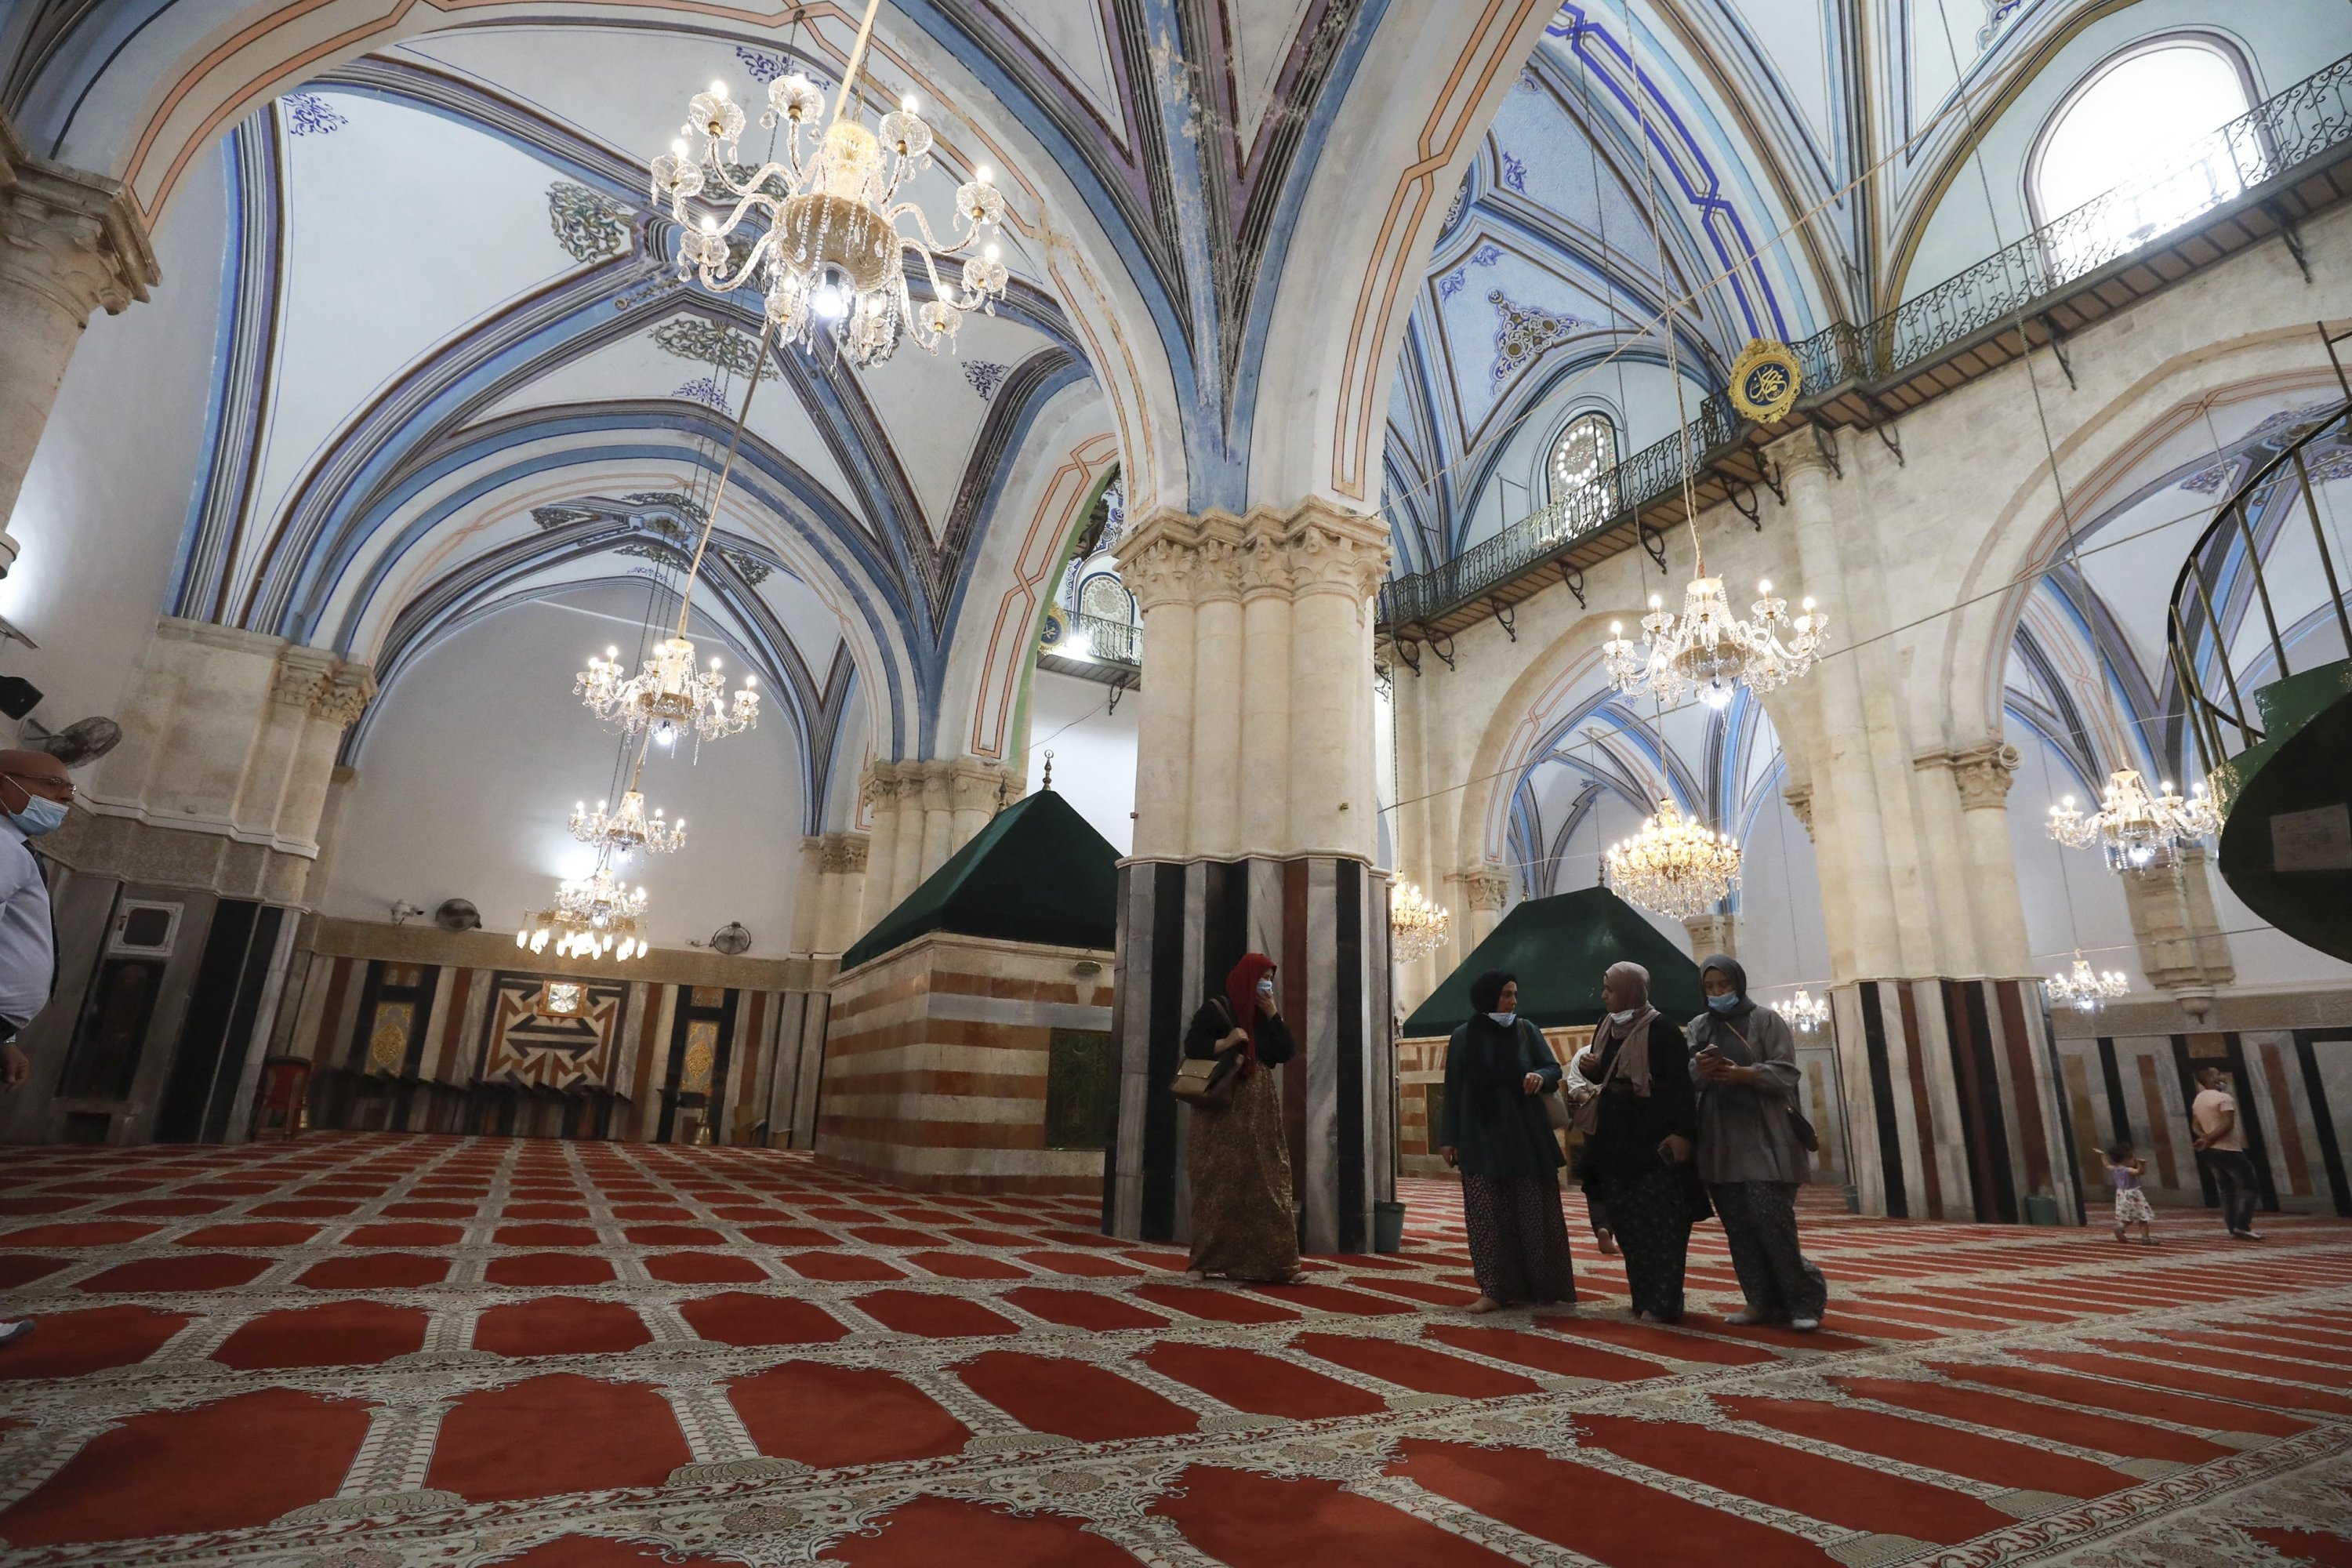 The interior of the Al-Haram Al-Ibrahimi Mosque, Hebron, southern West Bank, Palestine, Sept.10, 2020. (AA PHOTO)